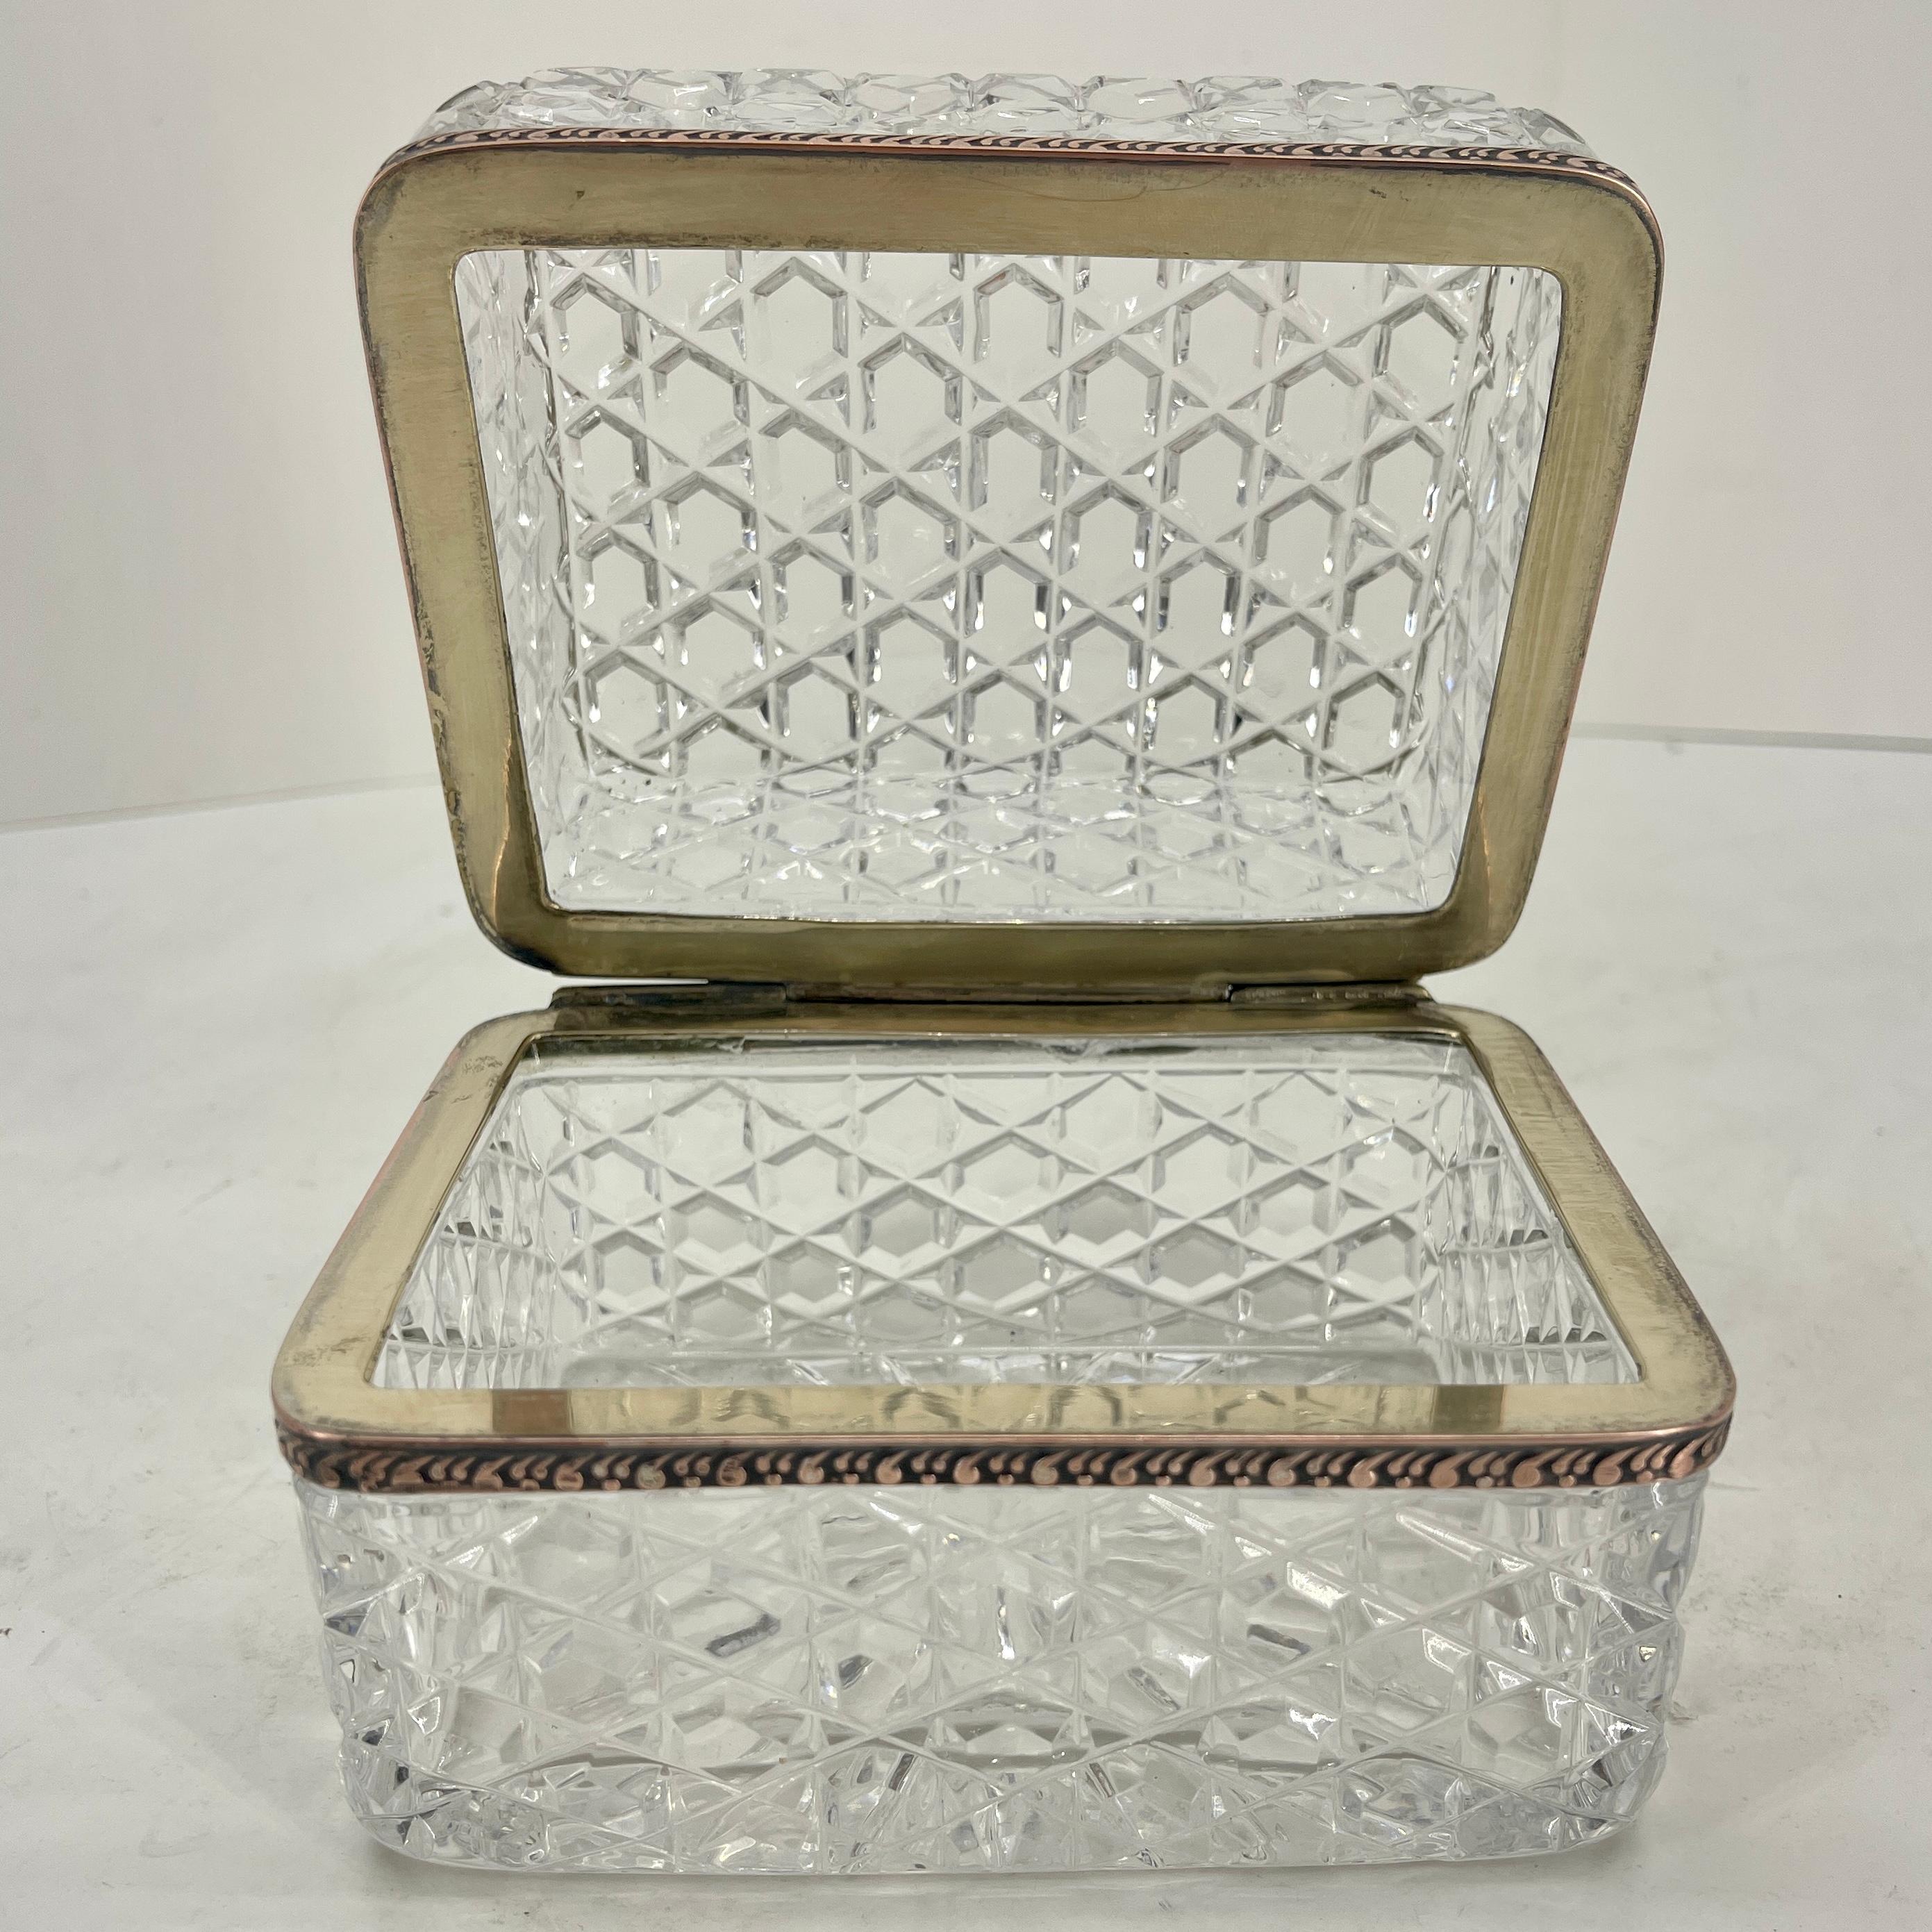 20th Century French Baccarat Style Cut Crystal Lidded Box with Brass Hardware For Sale